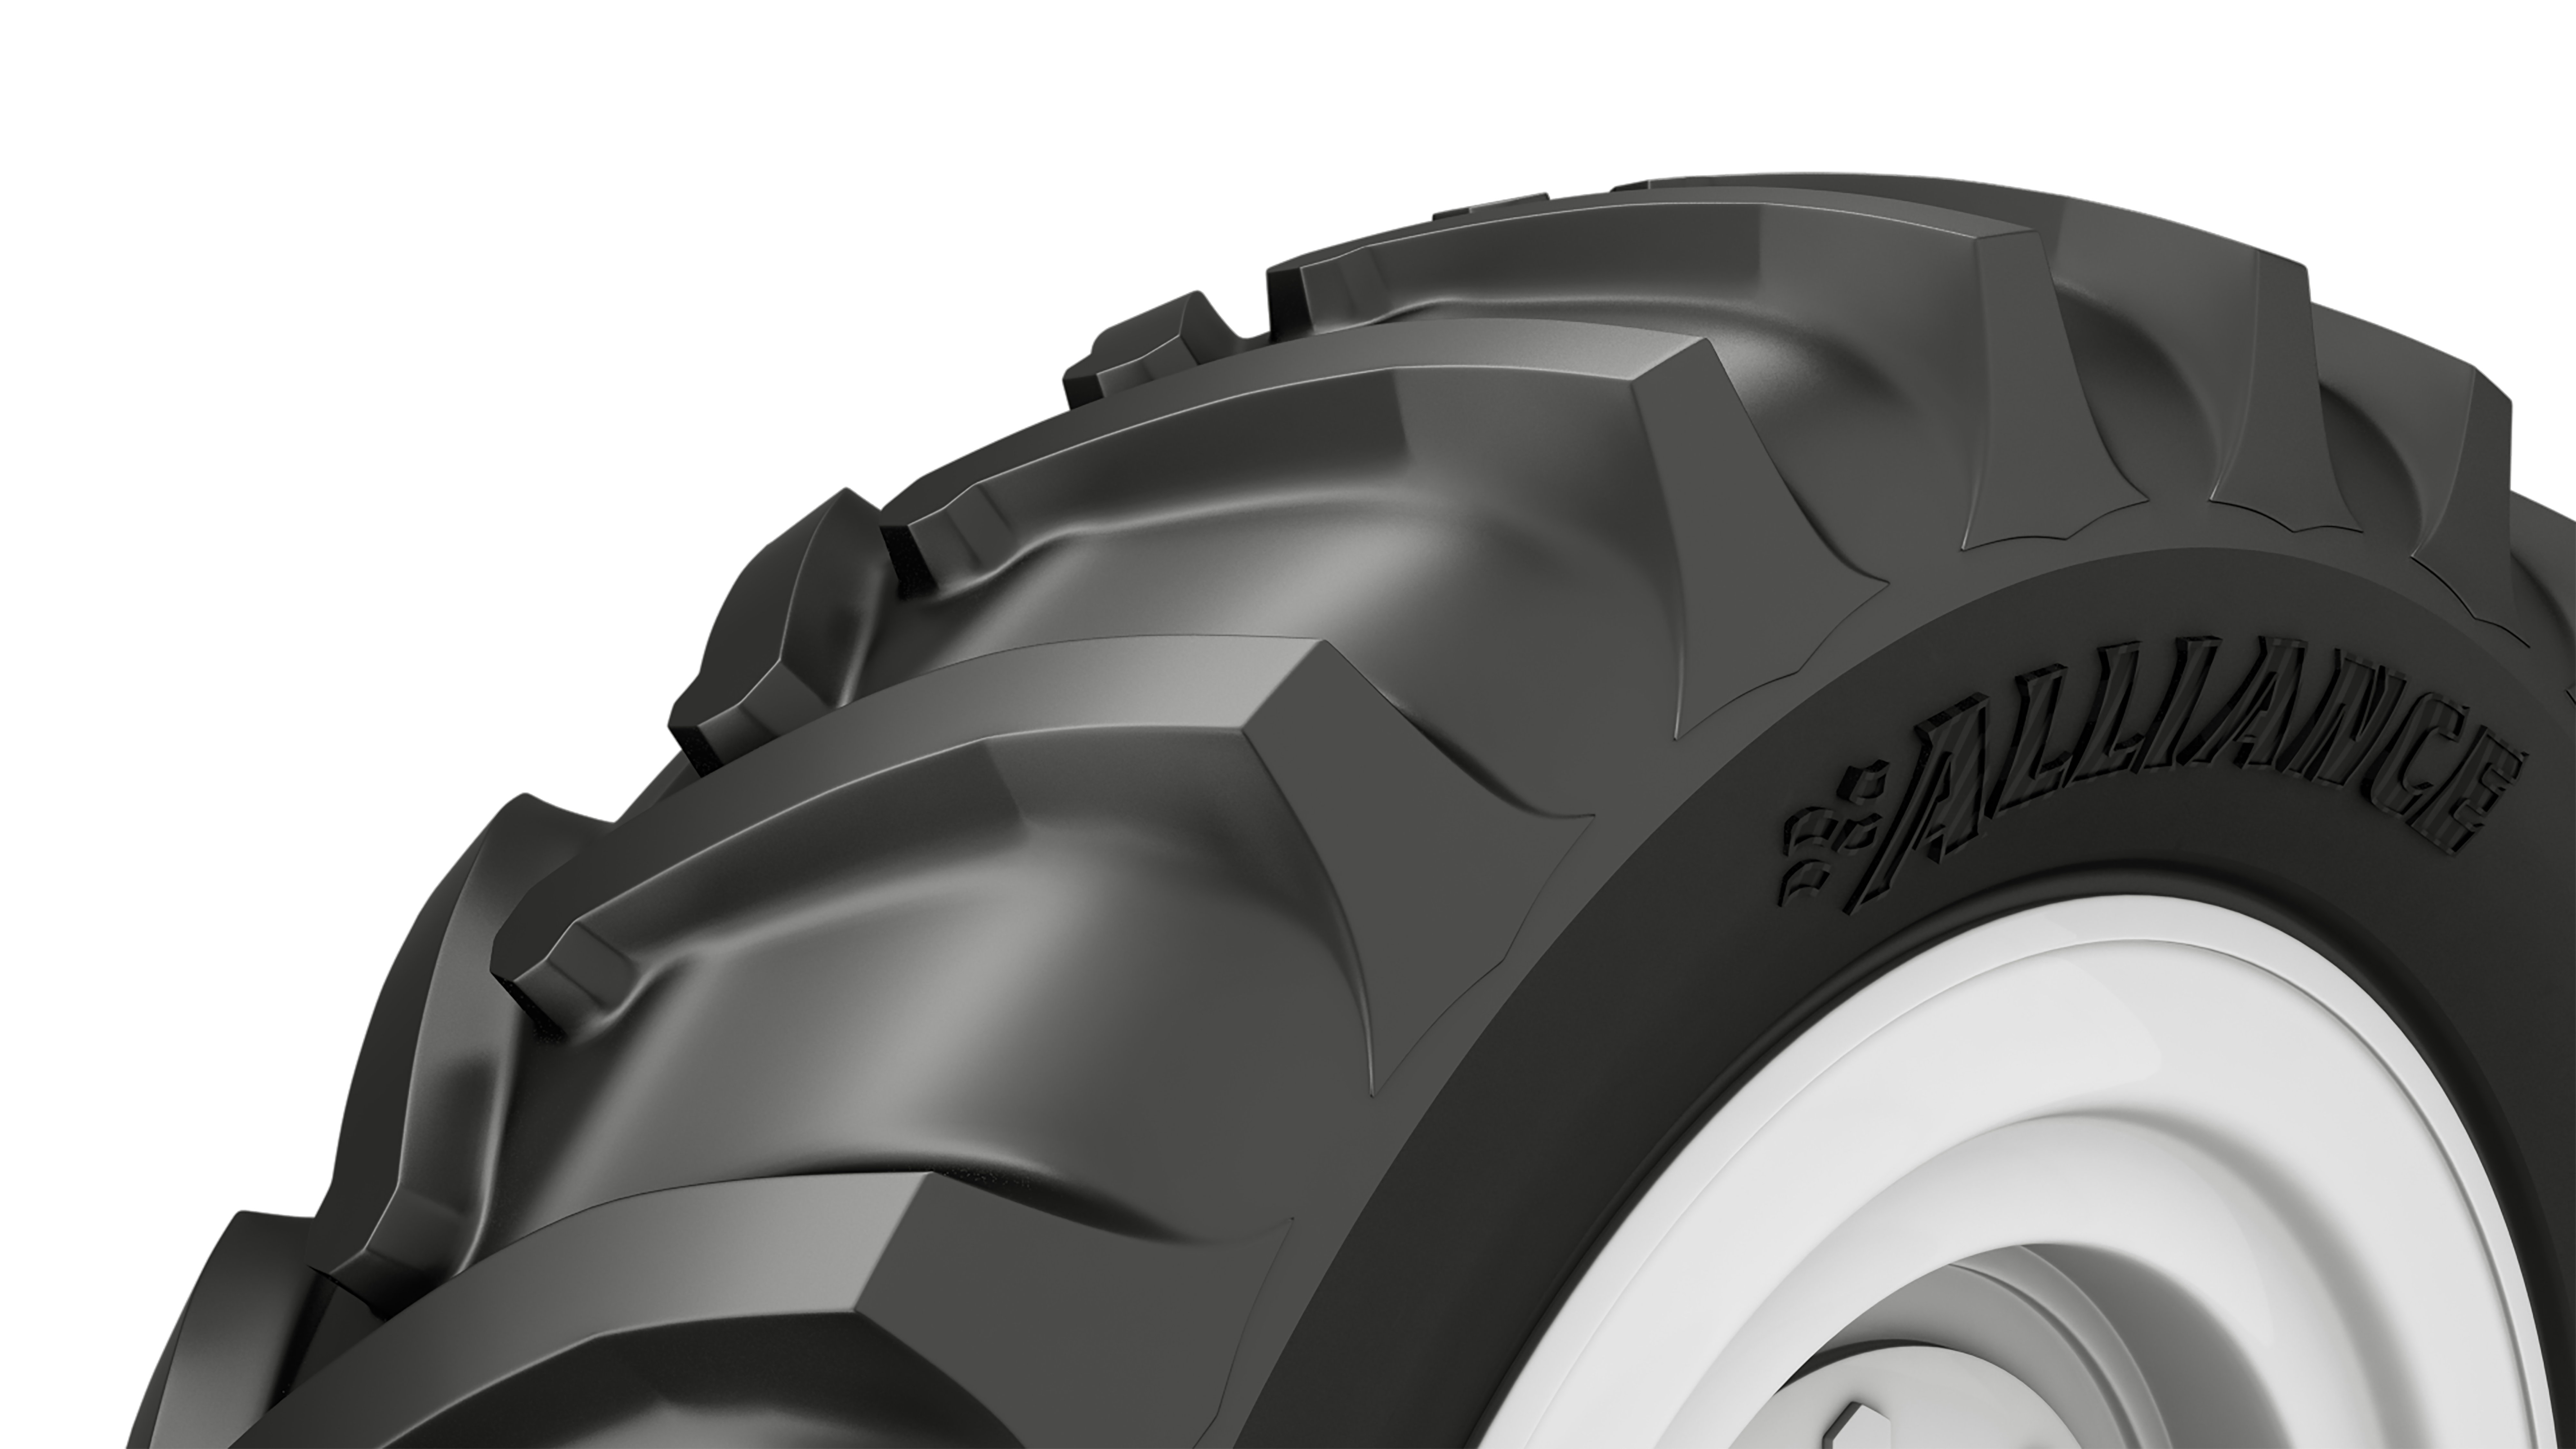 304 ALLIANCE AGRICULTURE Tire